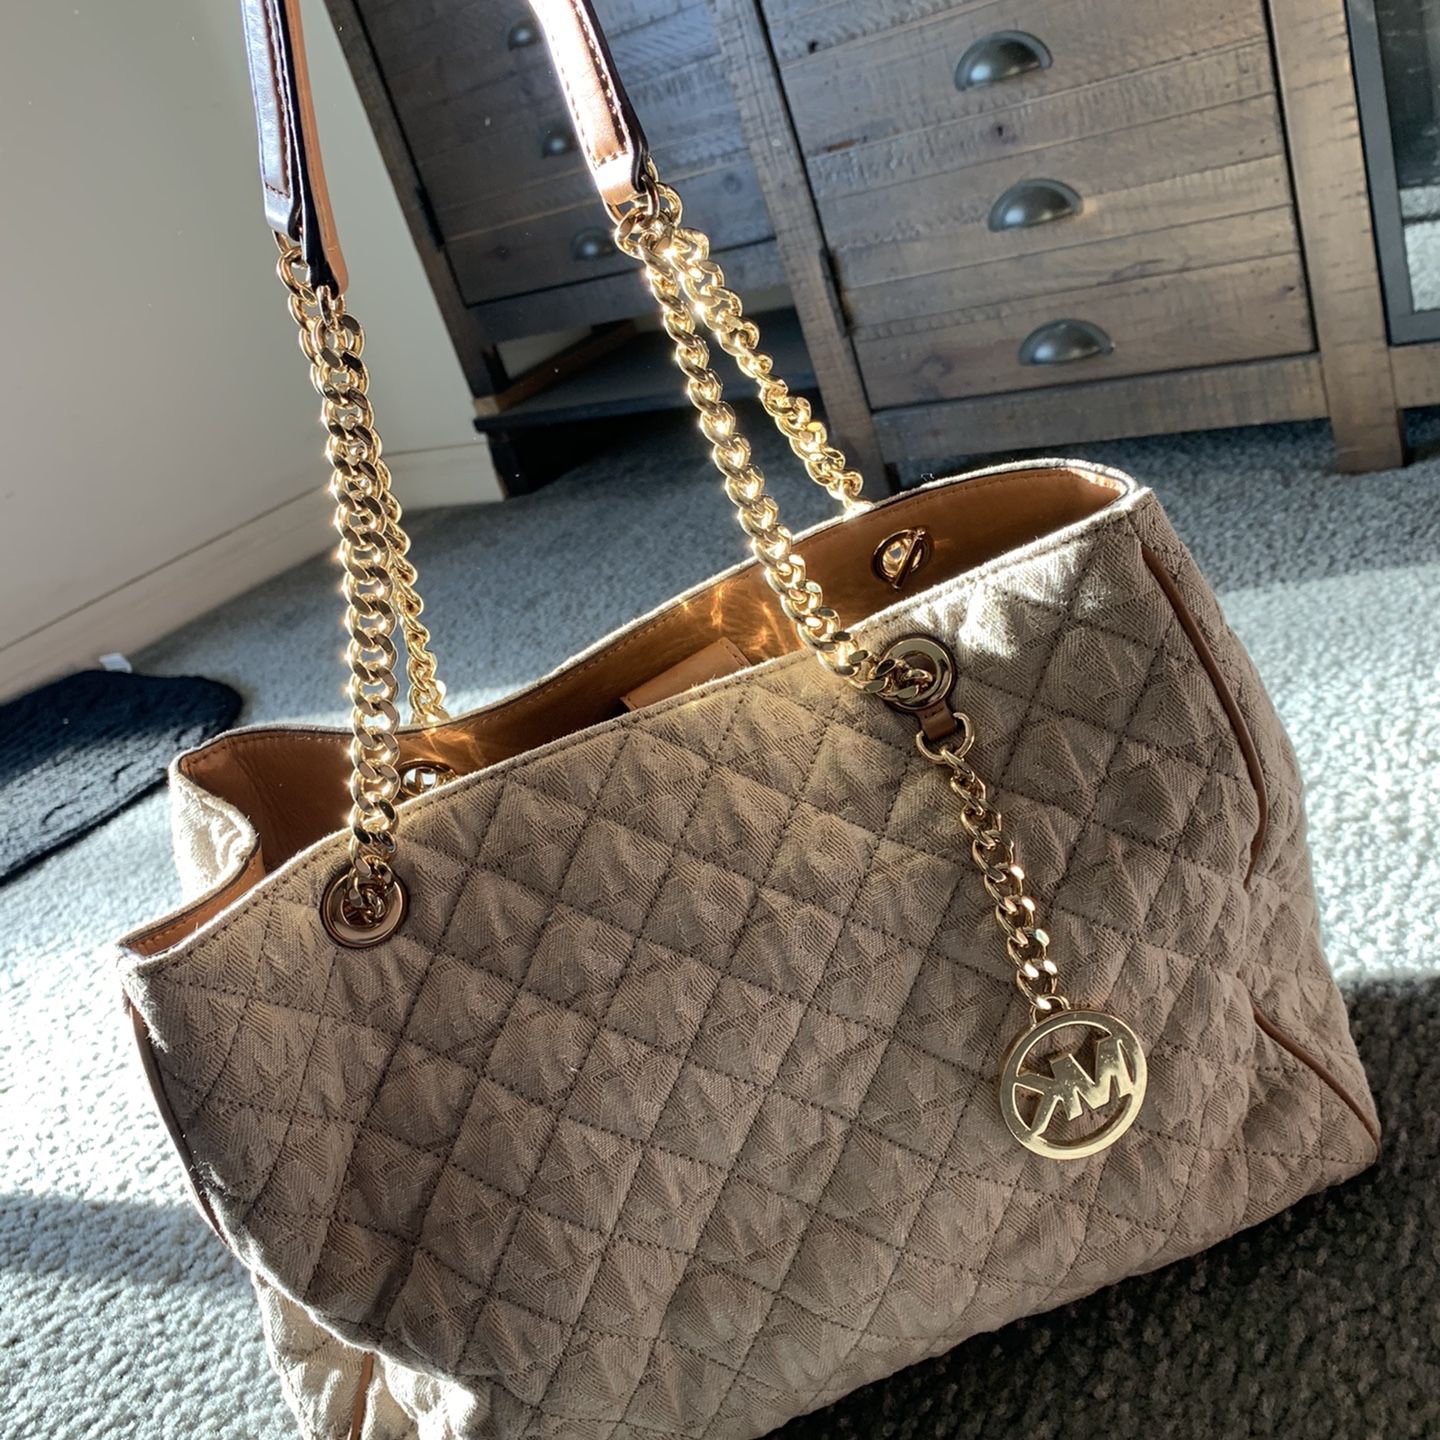 Beige Michael Kors Bag With Gold Accents